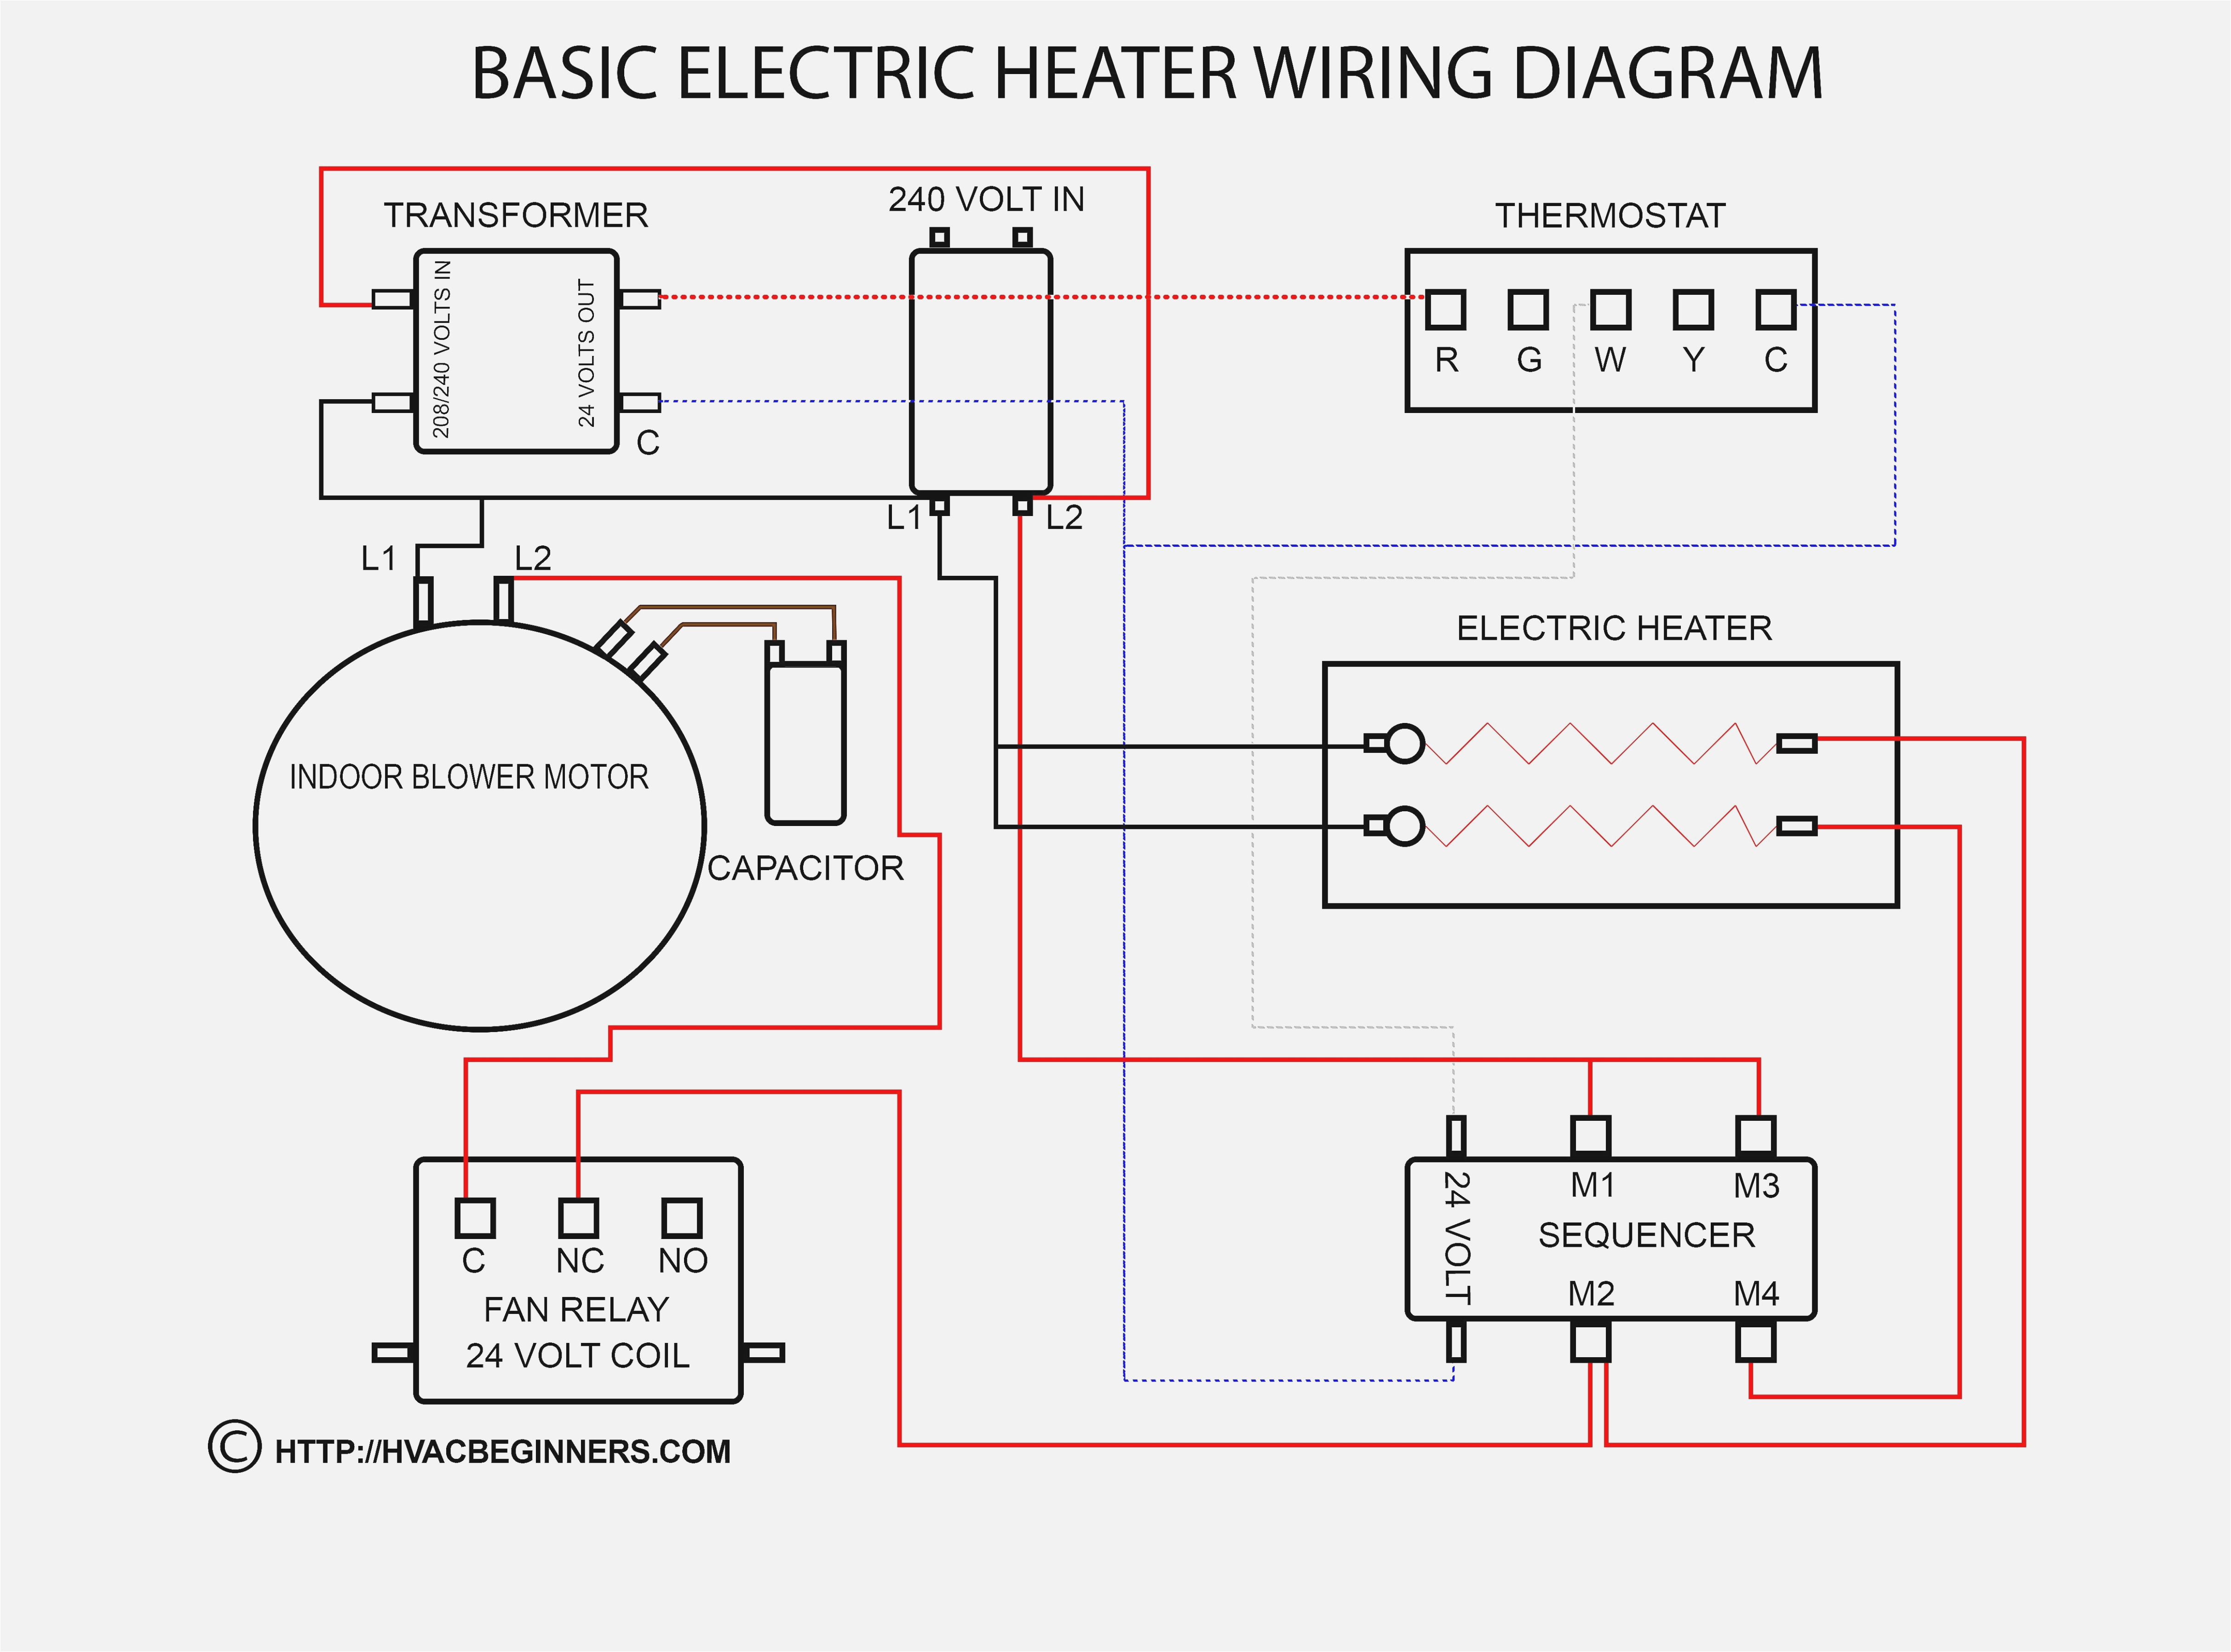 heating wiring diagram wiring diagram name central heating boiler wiring connection diagram5 300x300 central